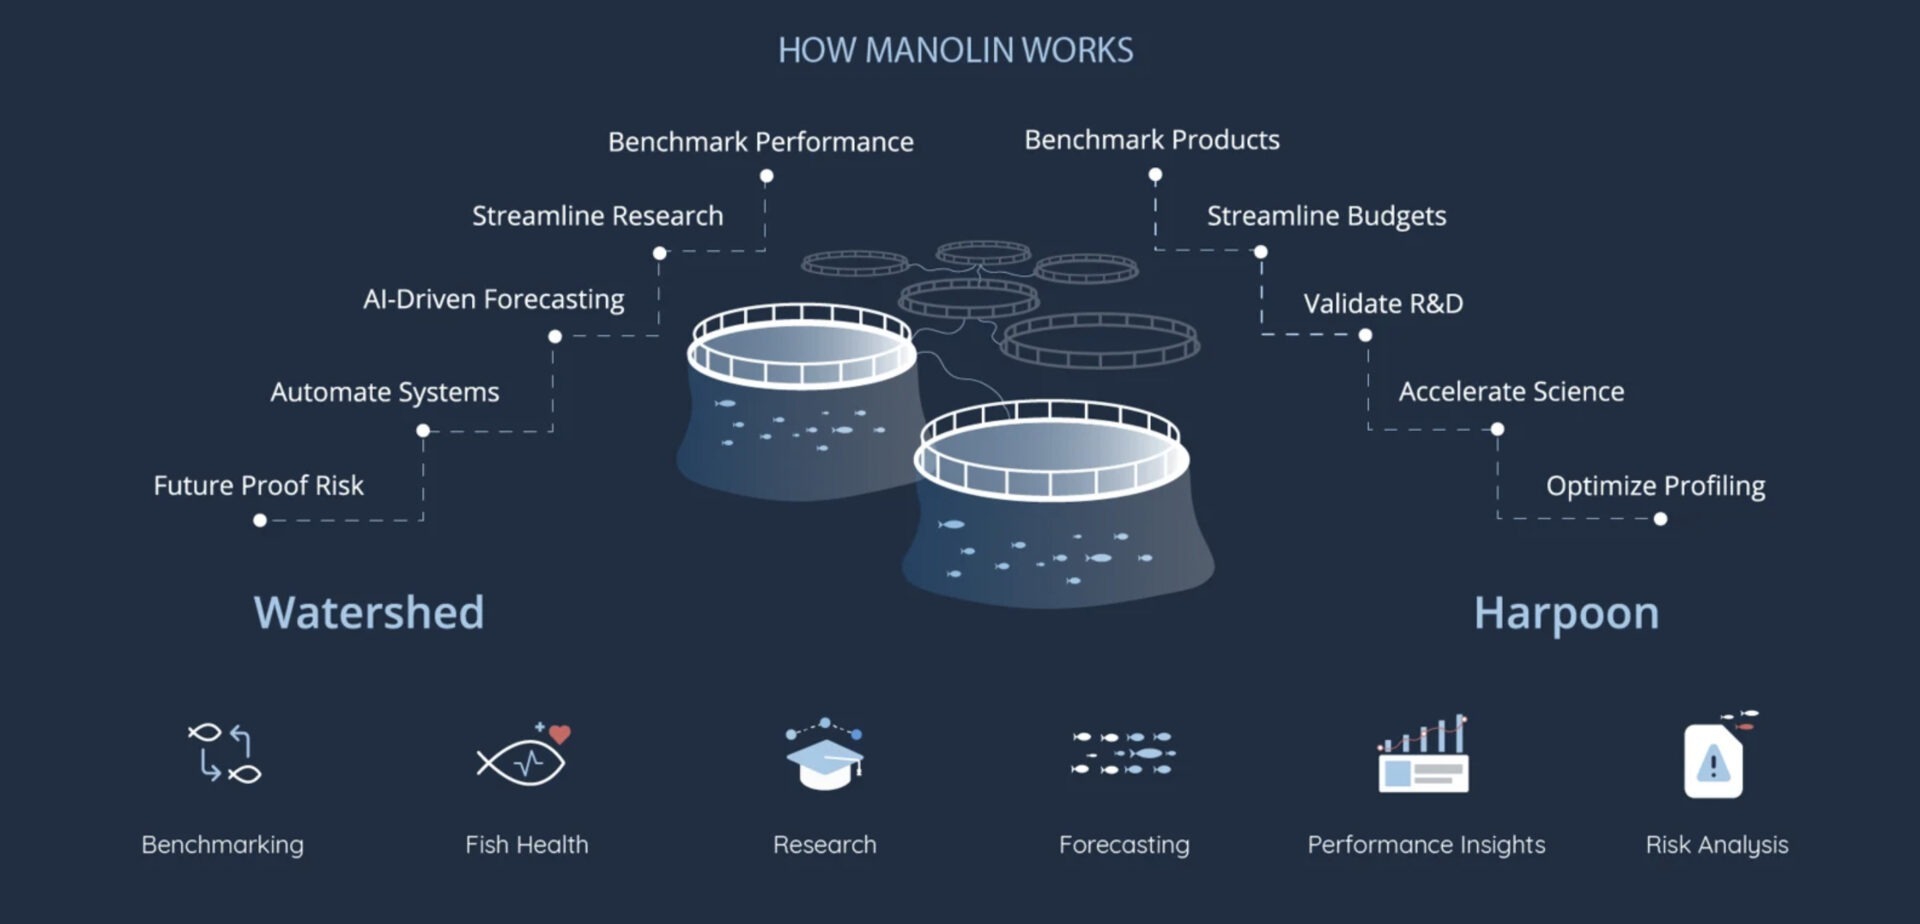 The Norwegian company Manolin starts a launches AI-driven platforms Watershed and Harpoon